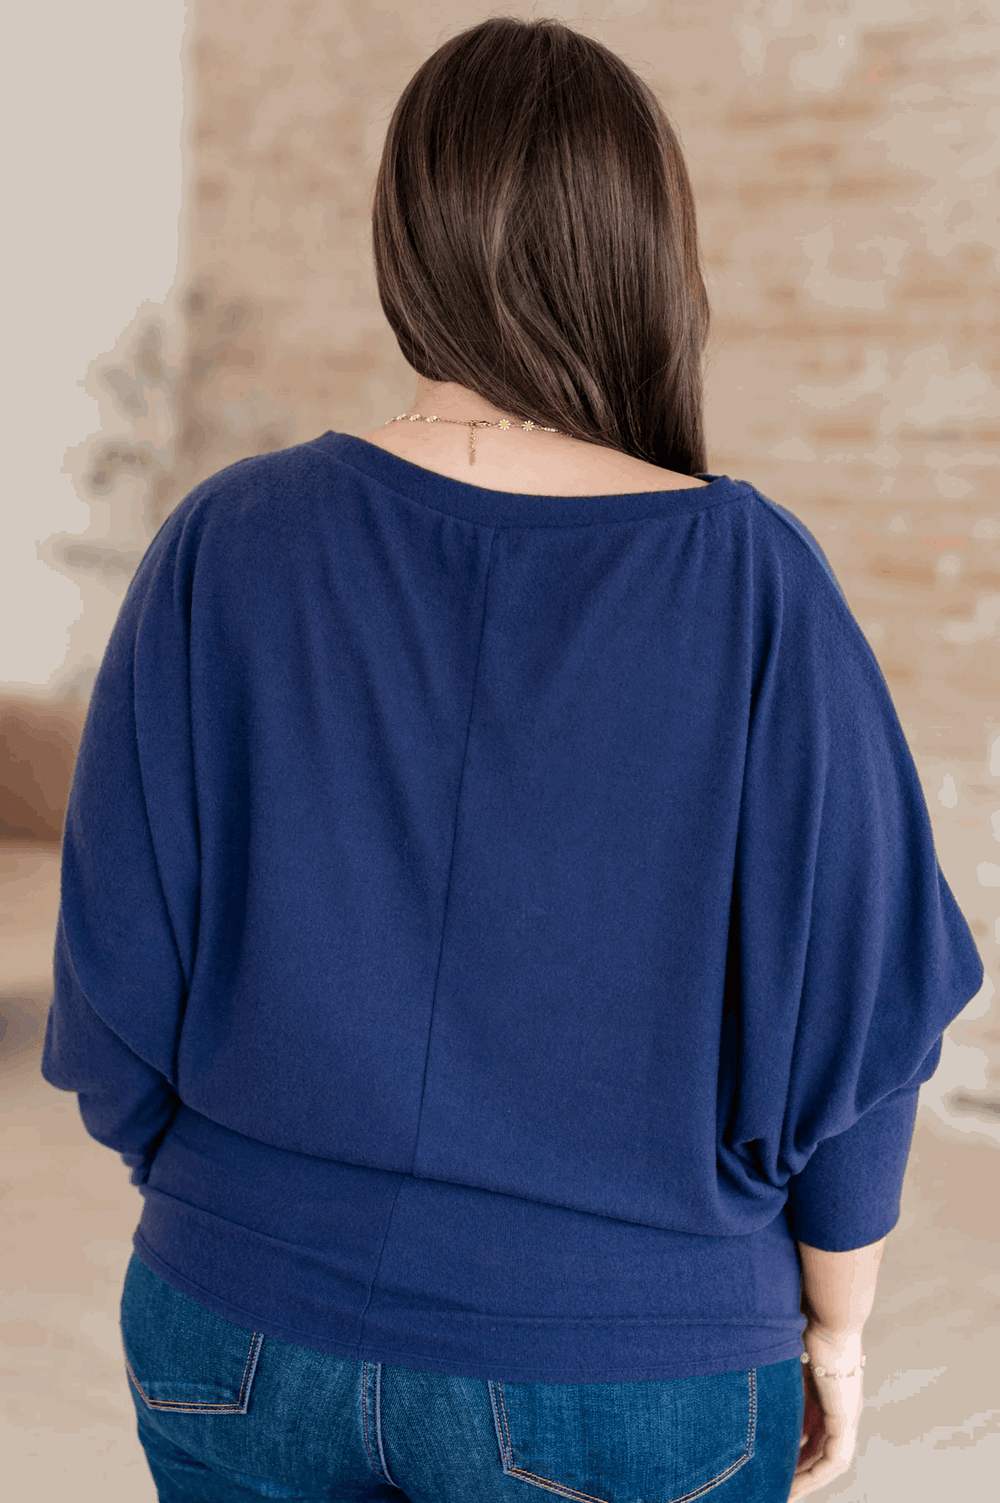 Batwing Sleeve Boatneck Top in Navy Shirts & Tops